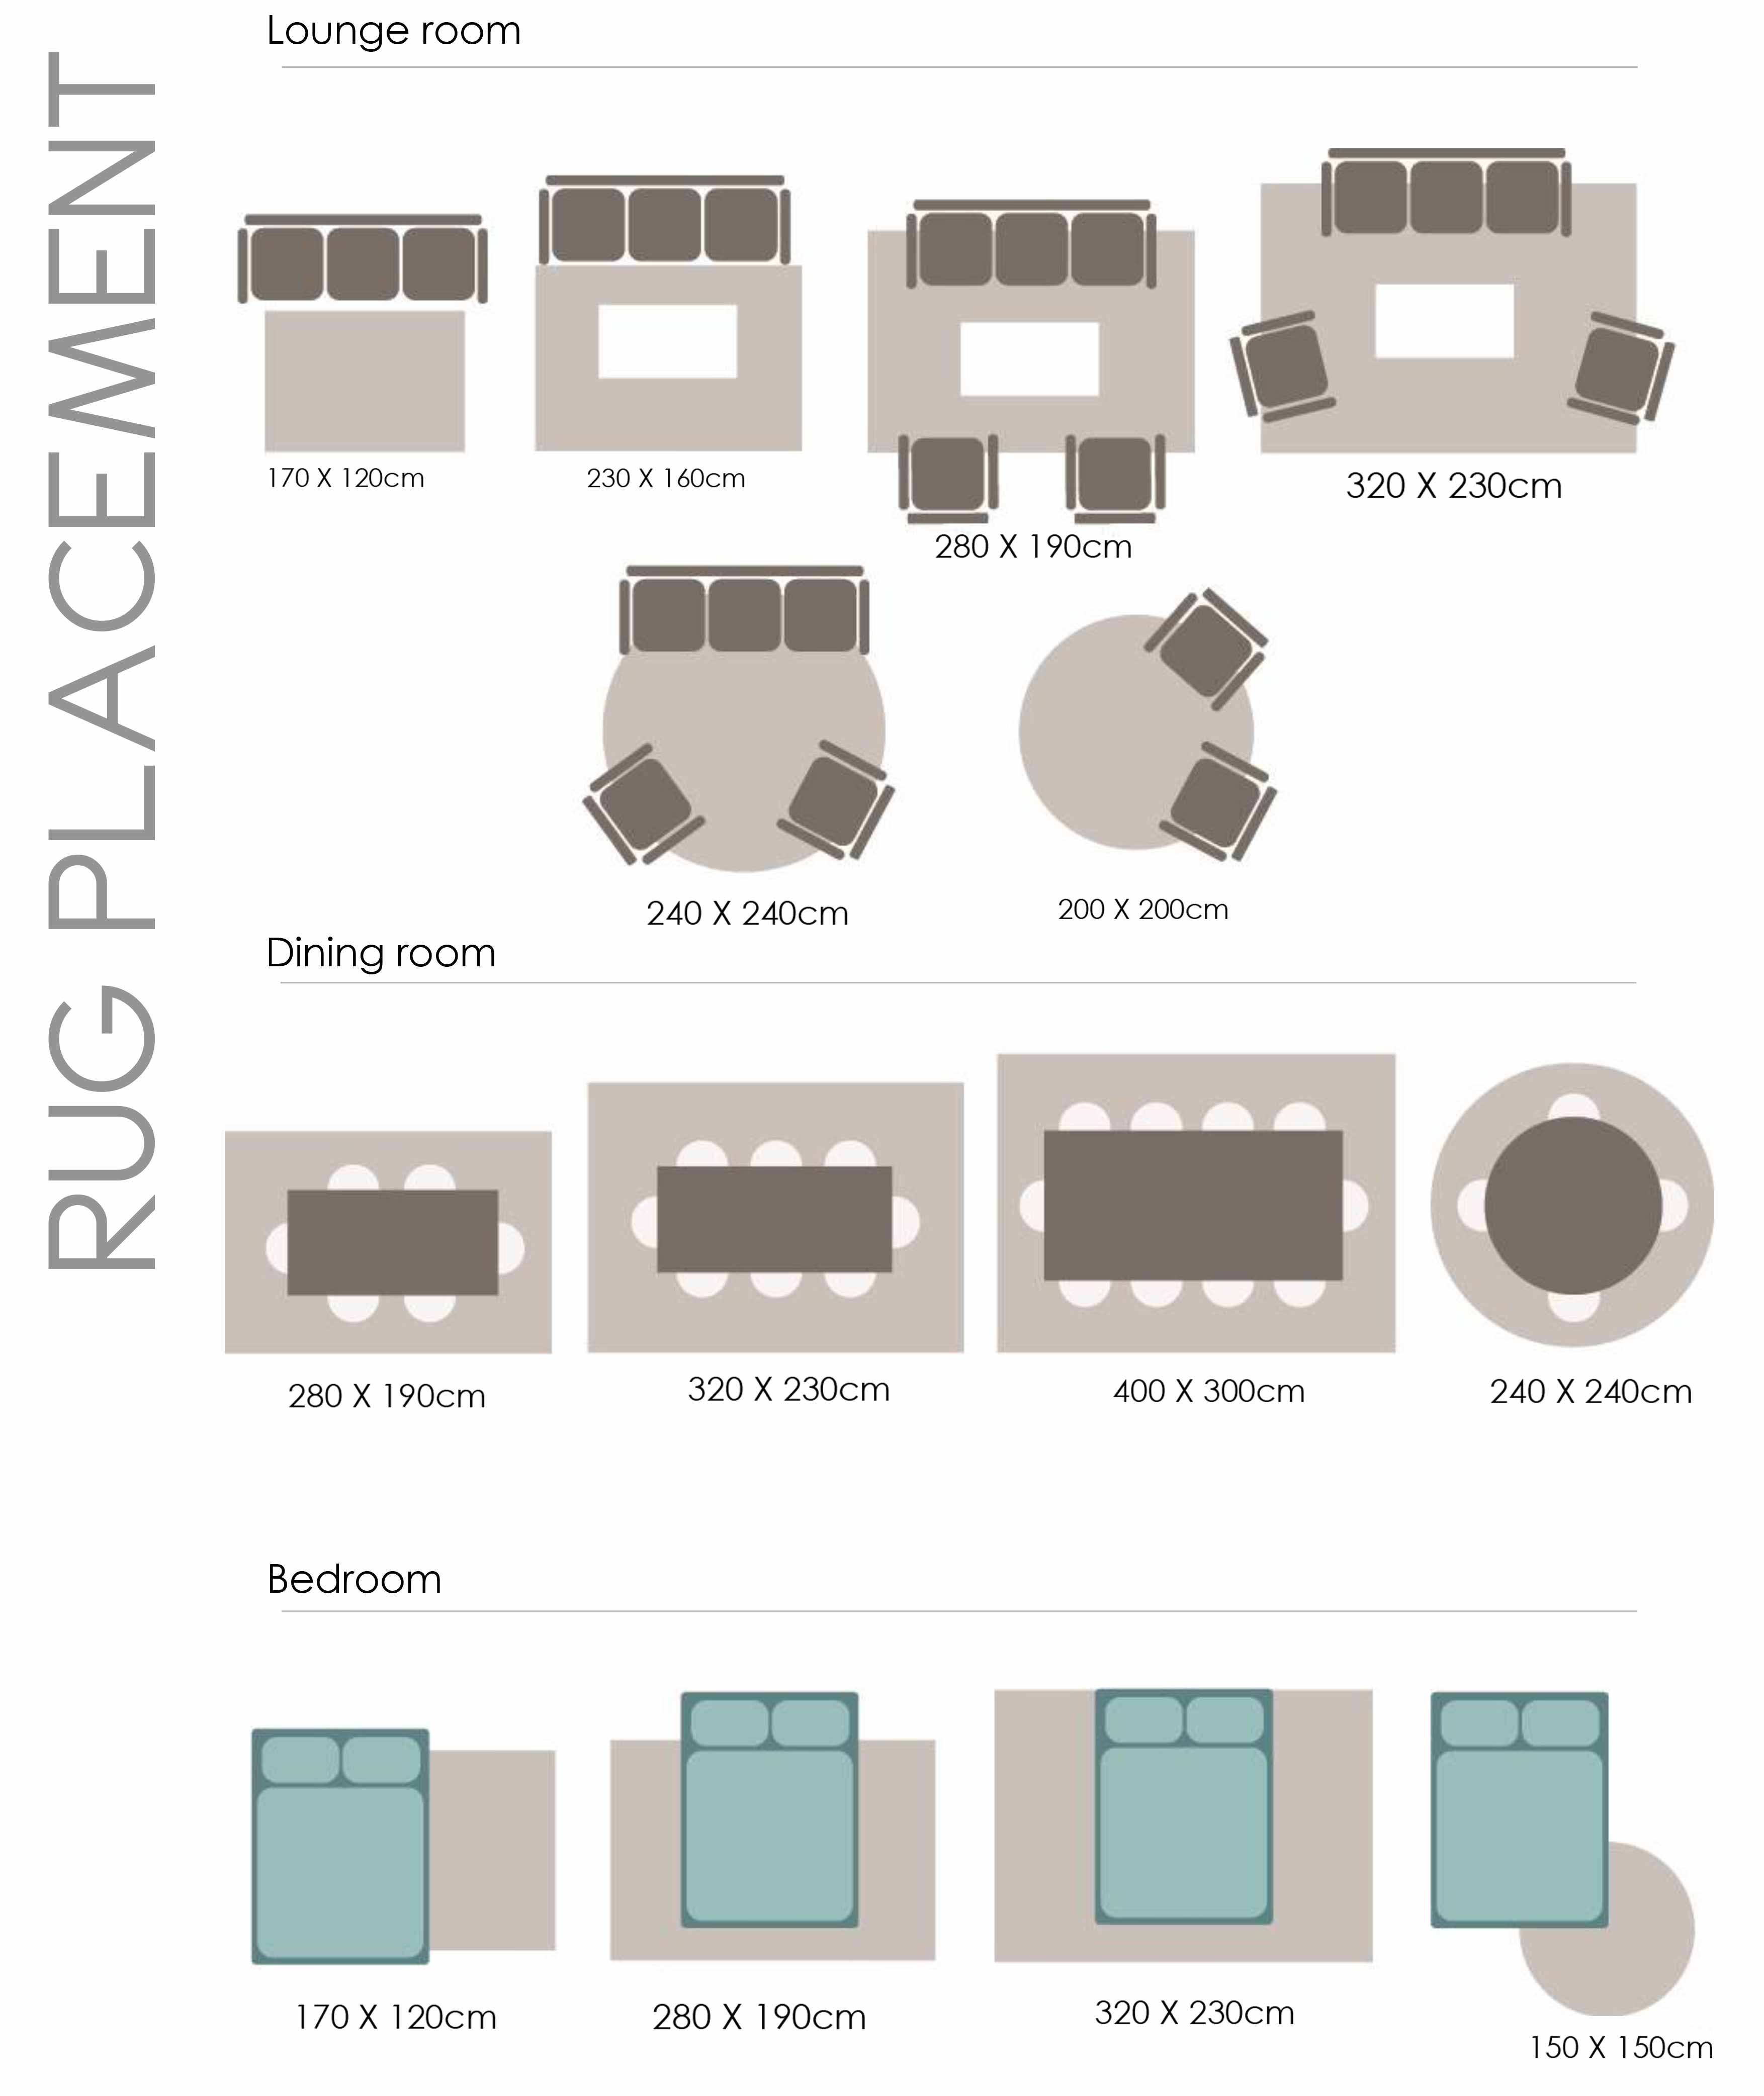 RUG PLACEMENT GUIDE